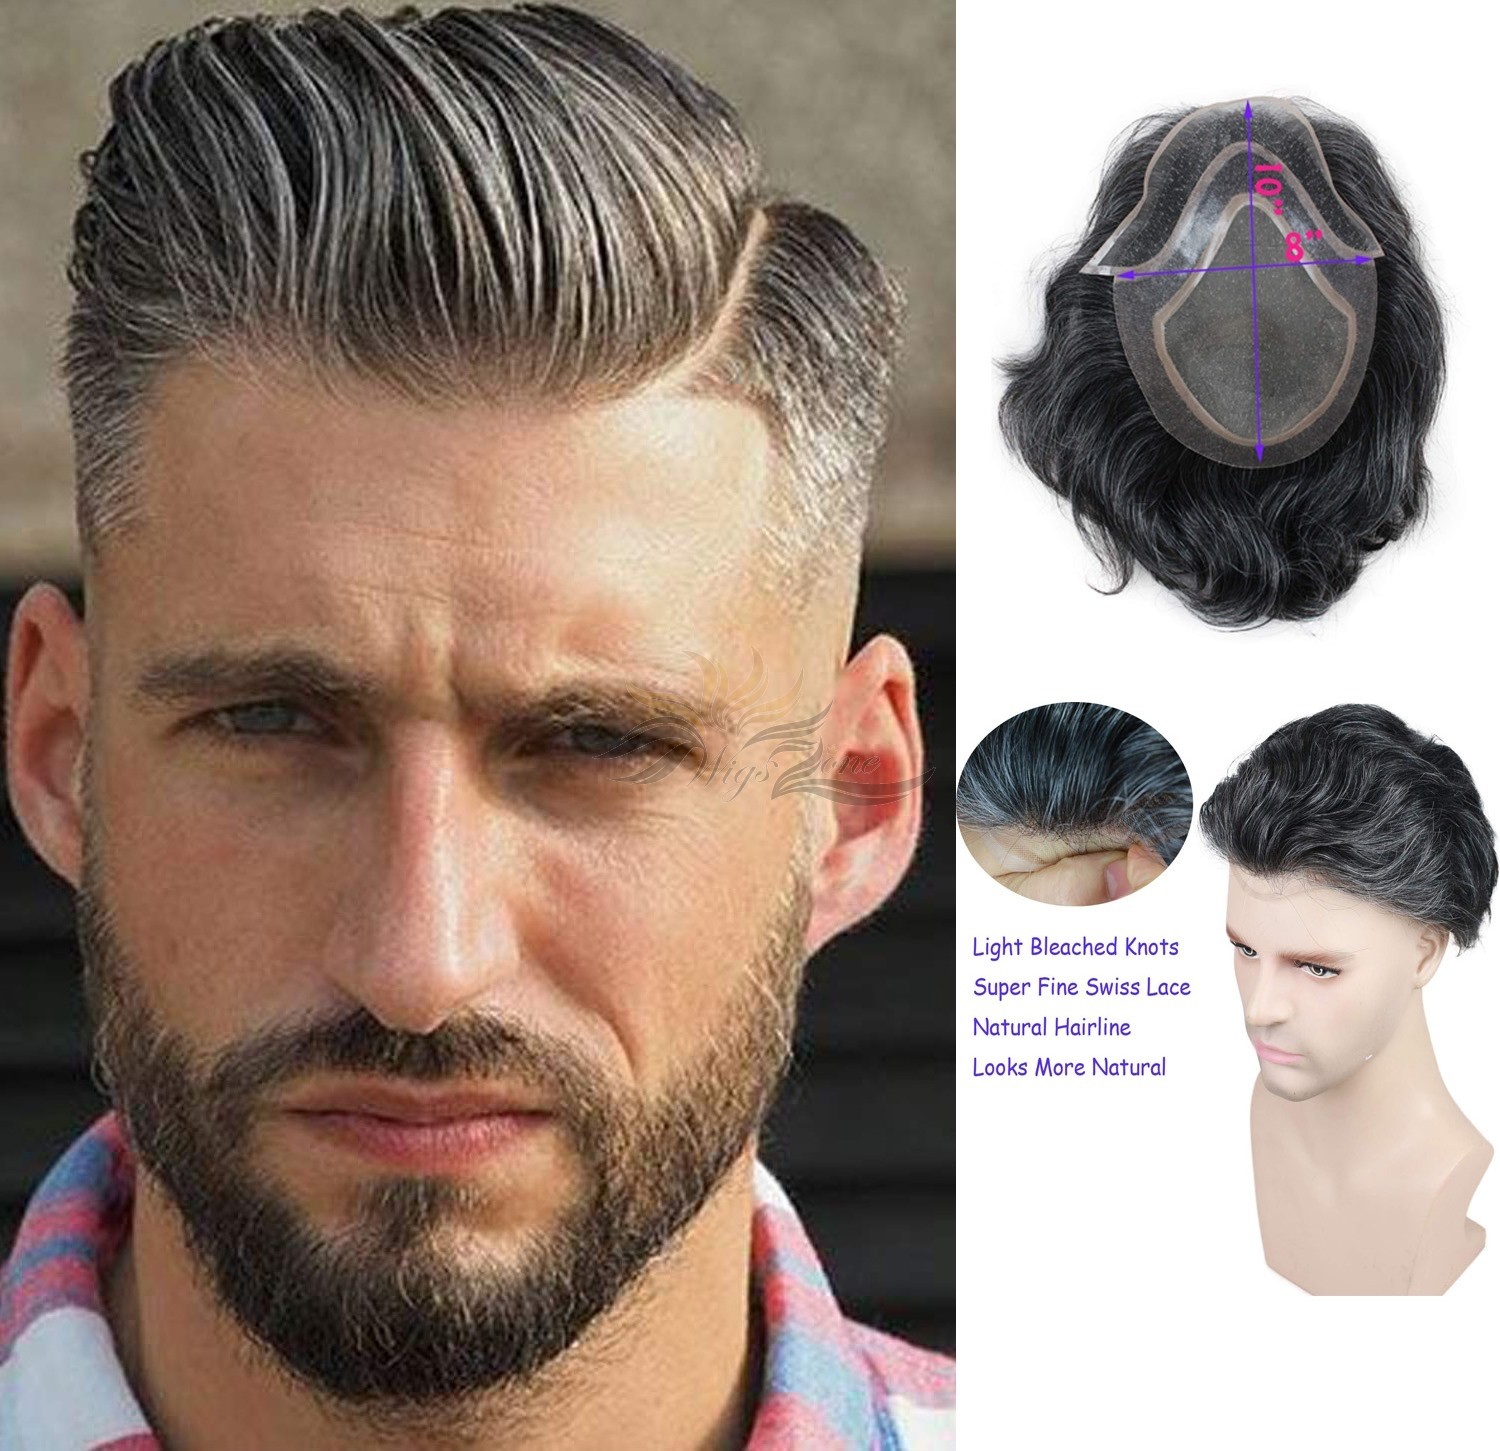 Toupee for Men Hair Replacement System European Human Hairpieces Super Thin Swiss Lace #1B Mixed Gray Hair [T50]